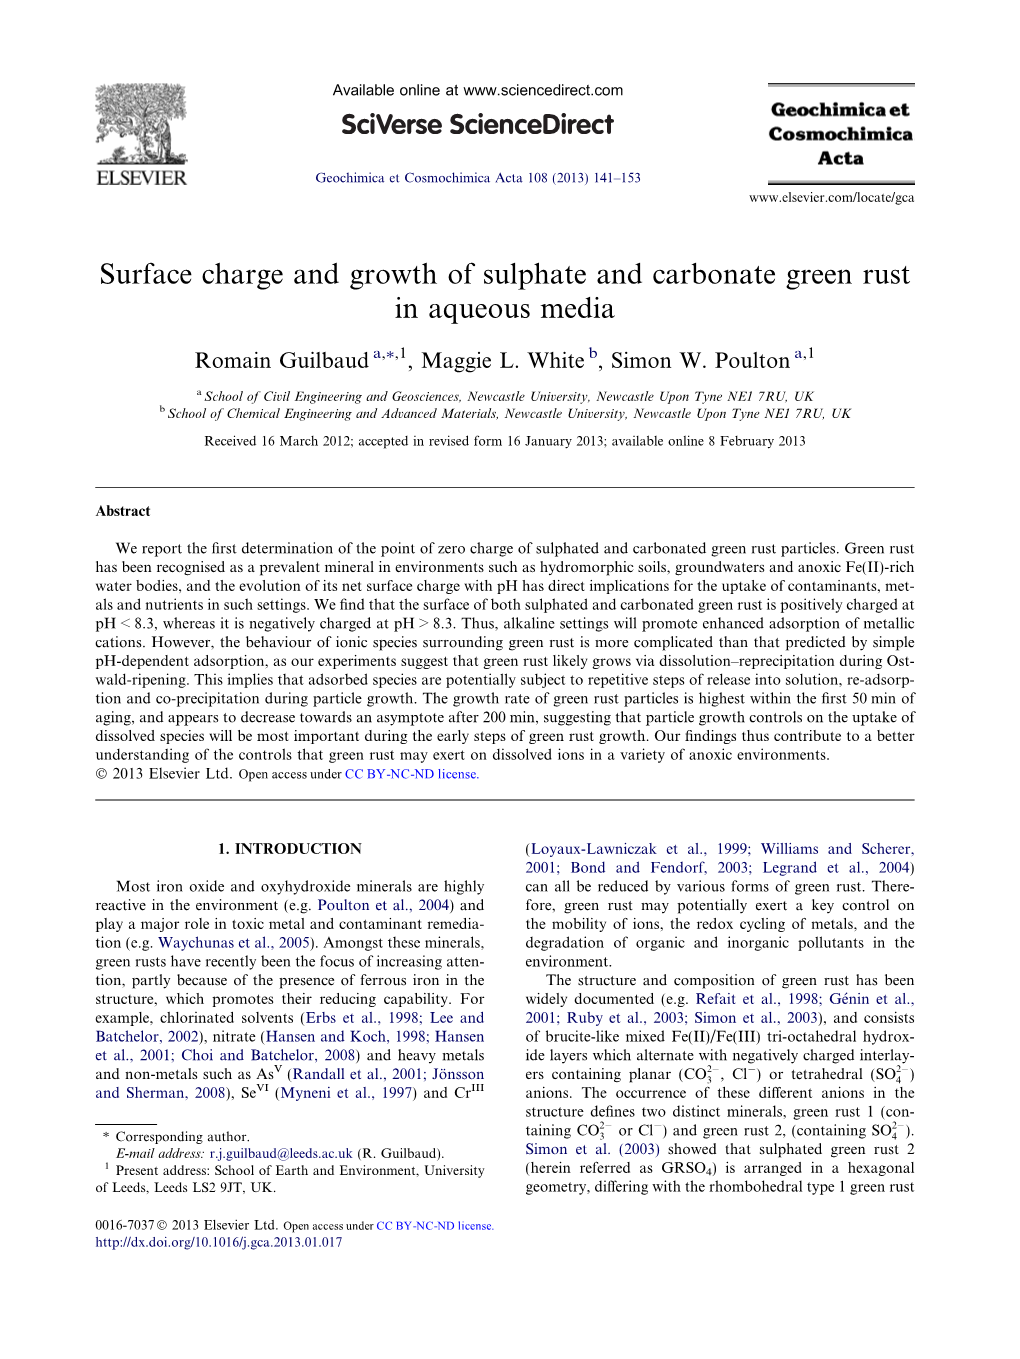 Surface Charge and Growth of Sulphate and Carbonate Green Rust in Aqueous Media